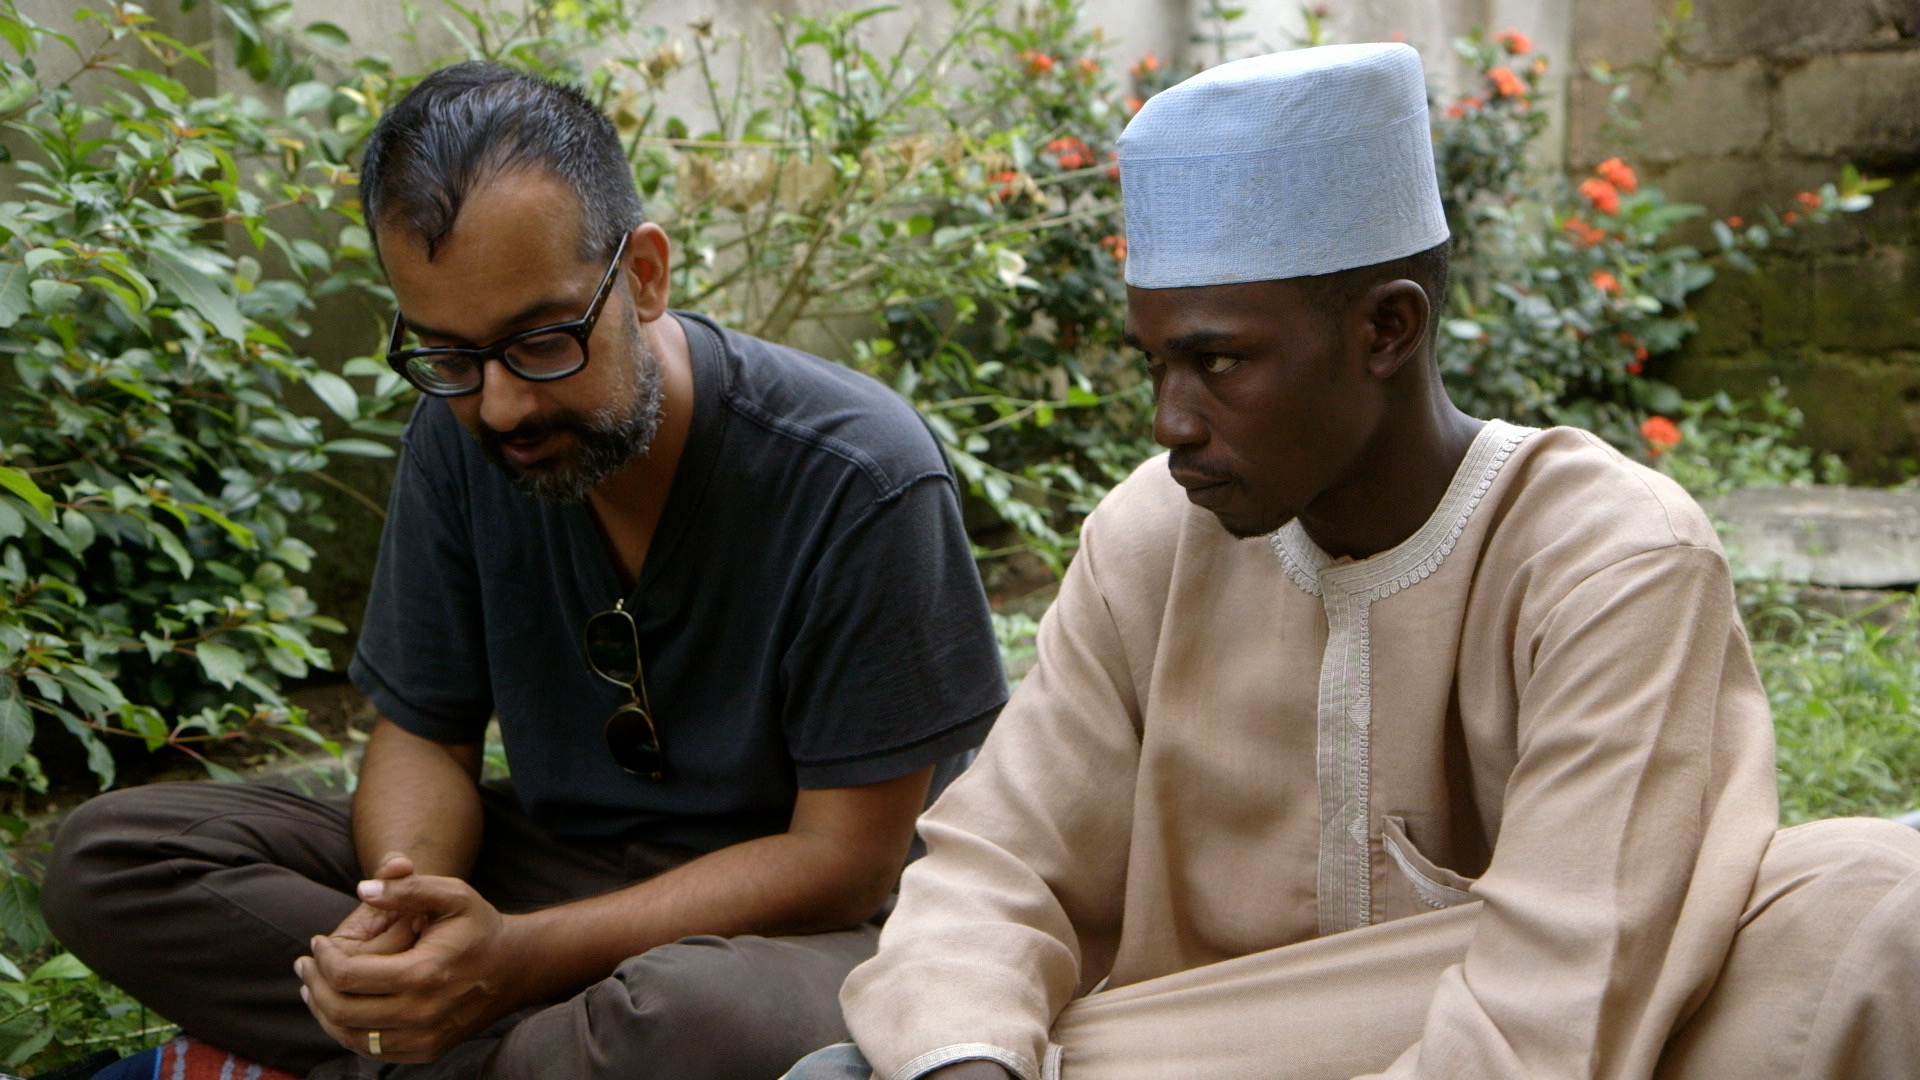 A Boko Haram fighter tells Suroosh what it would take for the violence to stop.